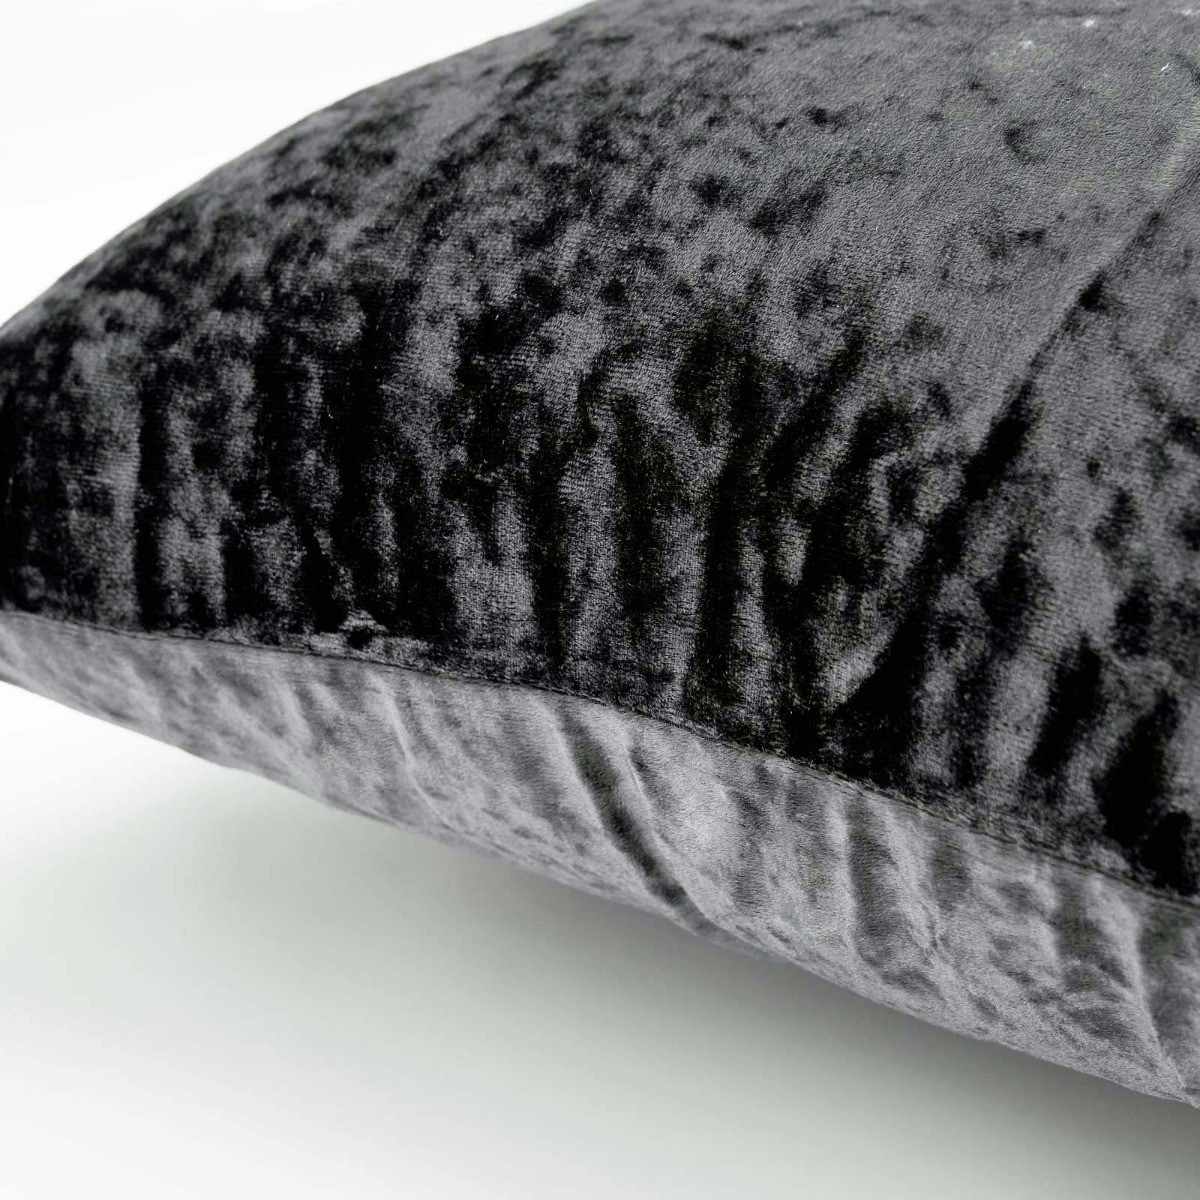 Sienna Crushed Velvet Set of 4 Cushion Covers - Charcoal>